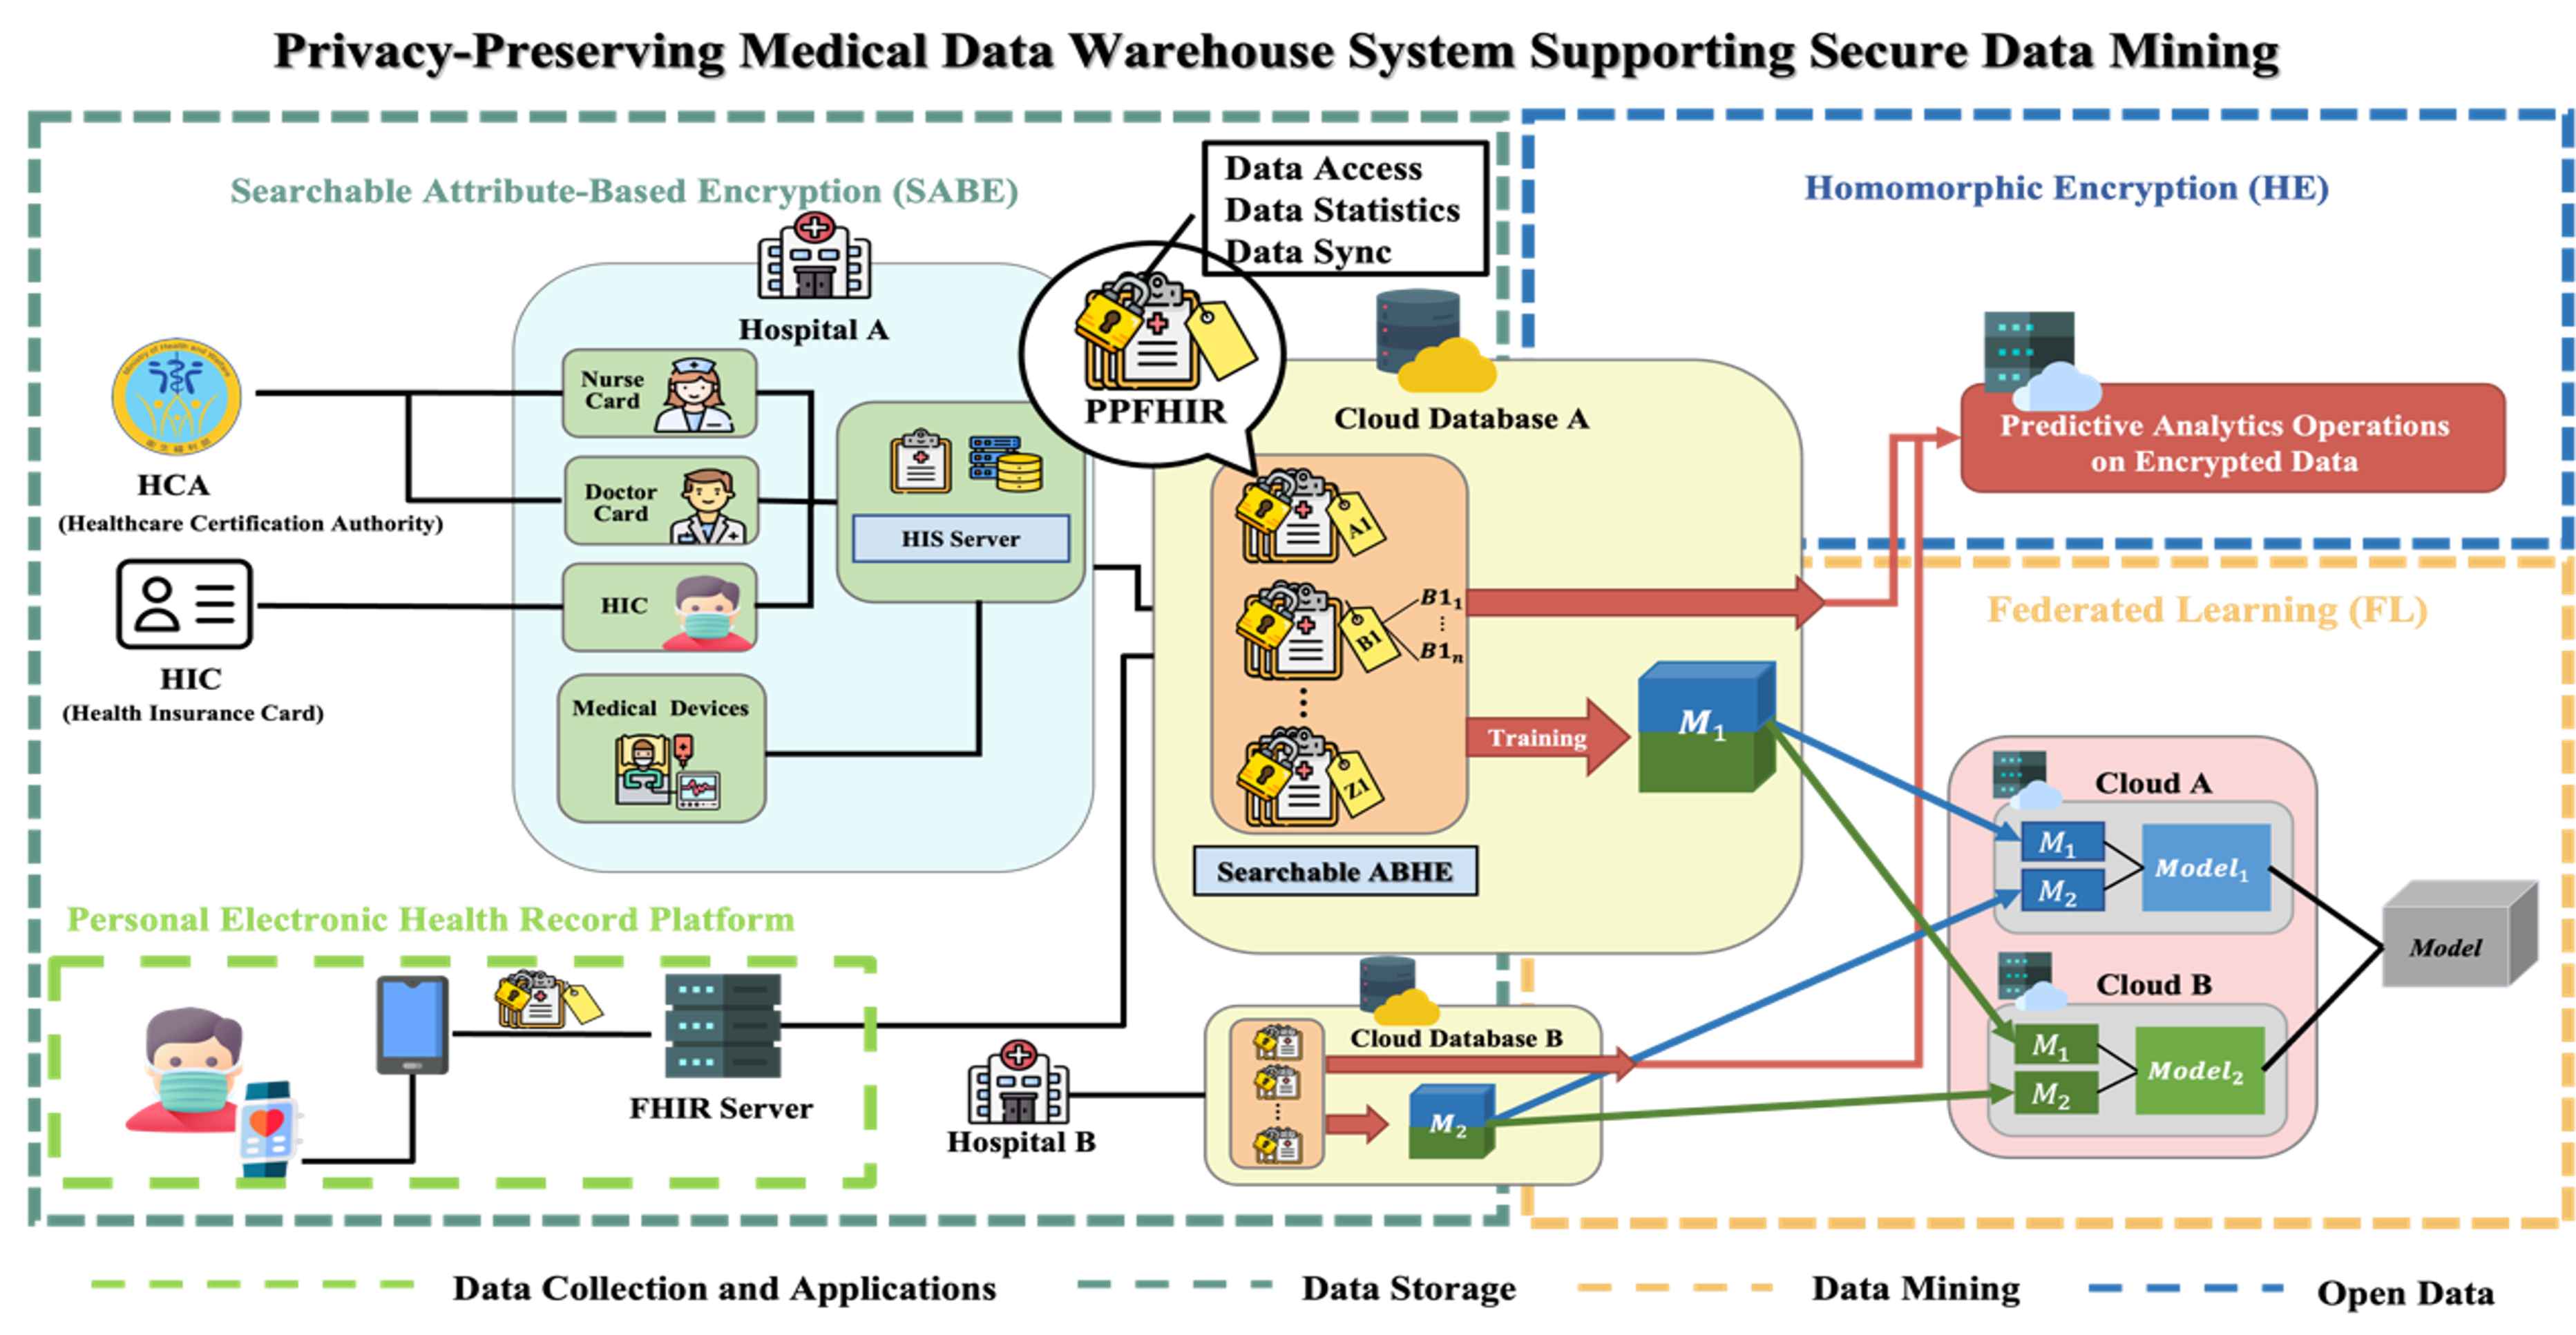 Privacy-Preserving Medical Data Warehouse System Supporting Secure Data Mining